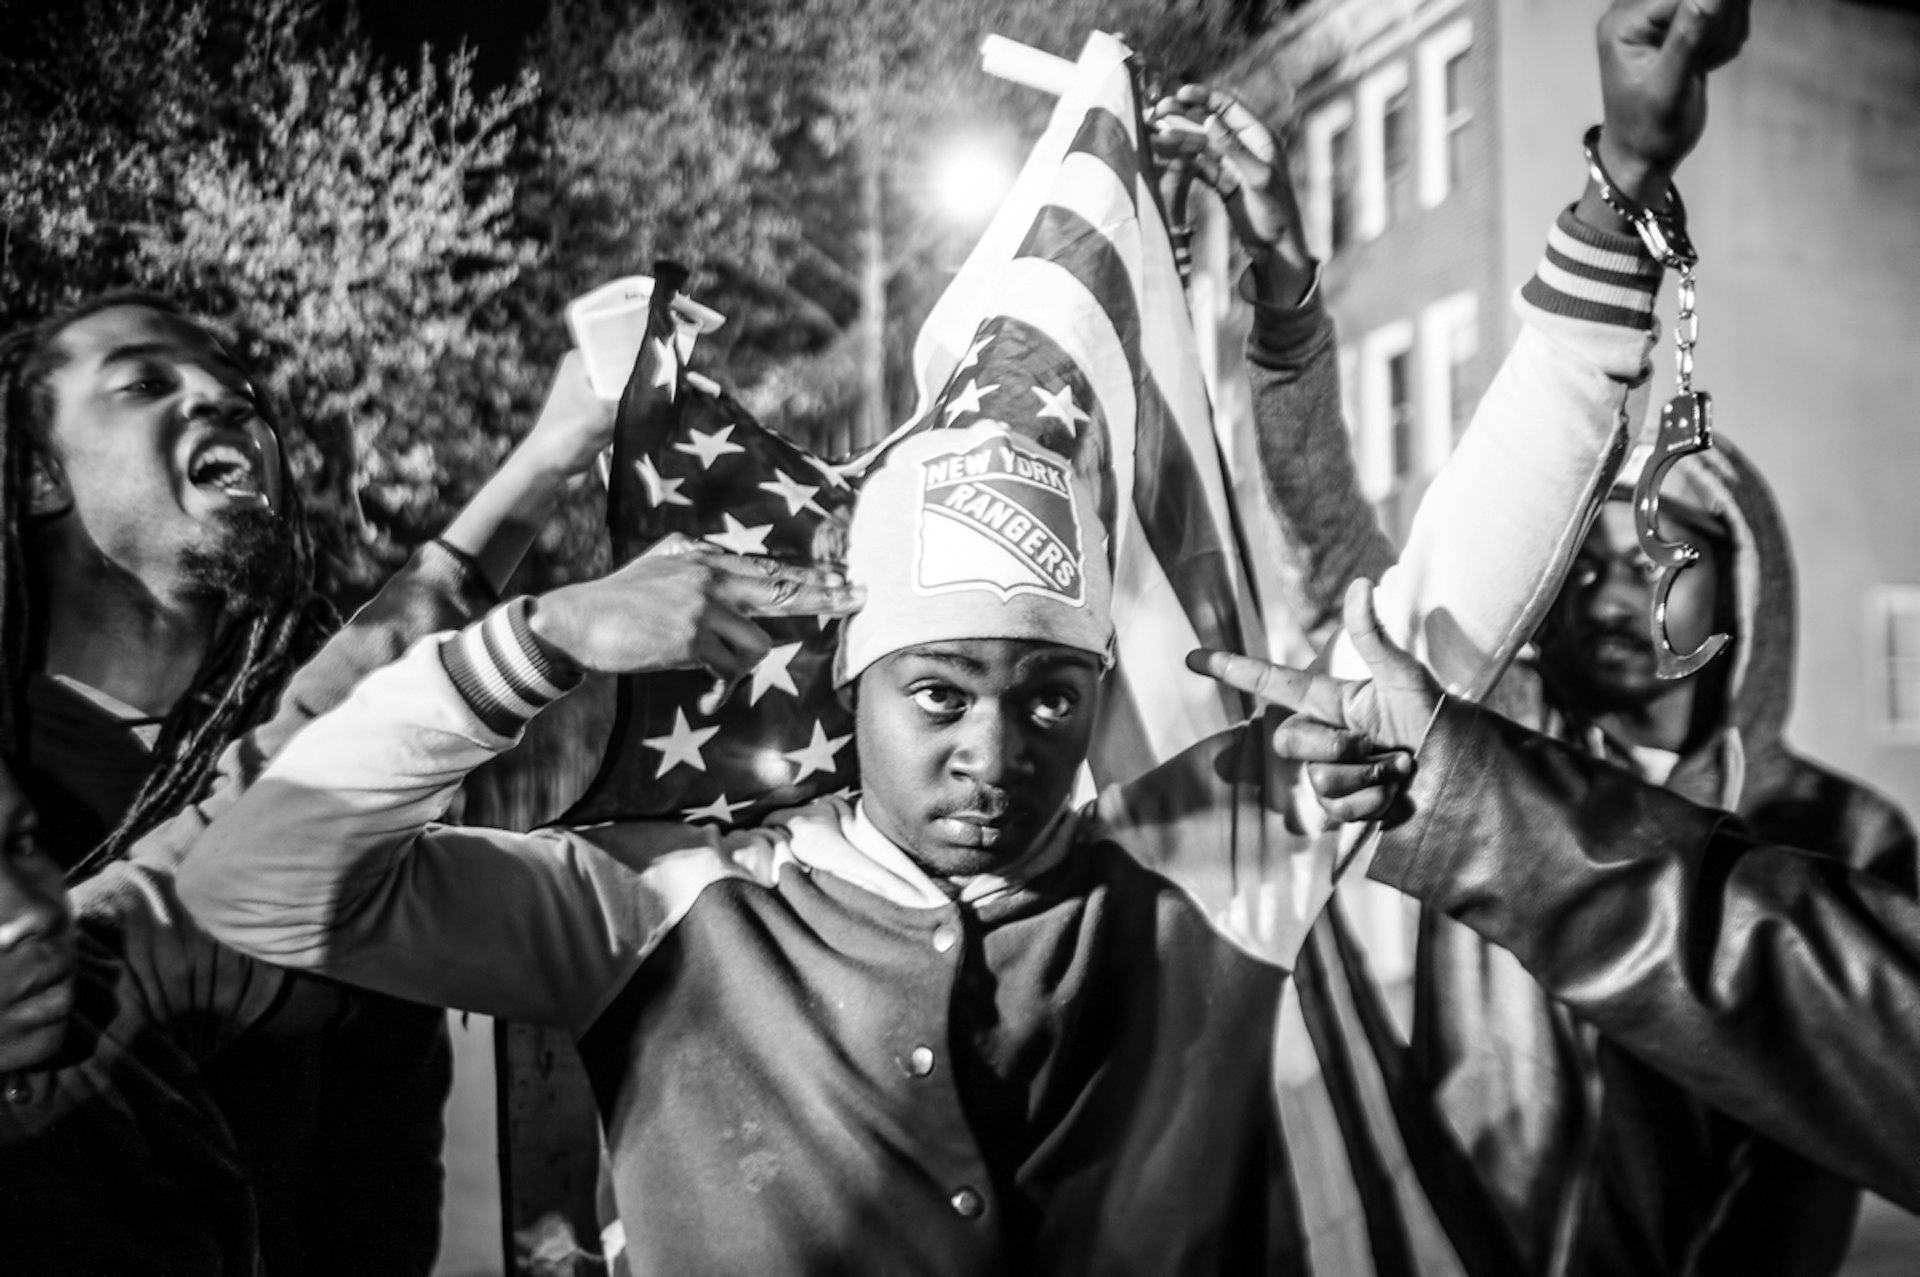 ‘Untitled’ Photo by Michael A. McCoy. Baltimore Uprising, Baltimore, MD, 2015